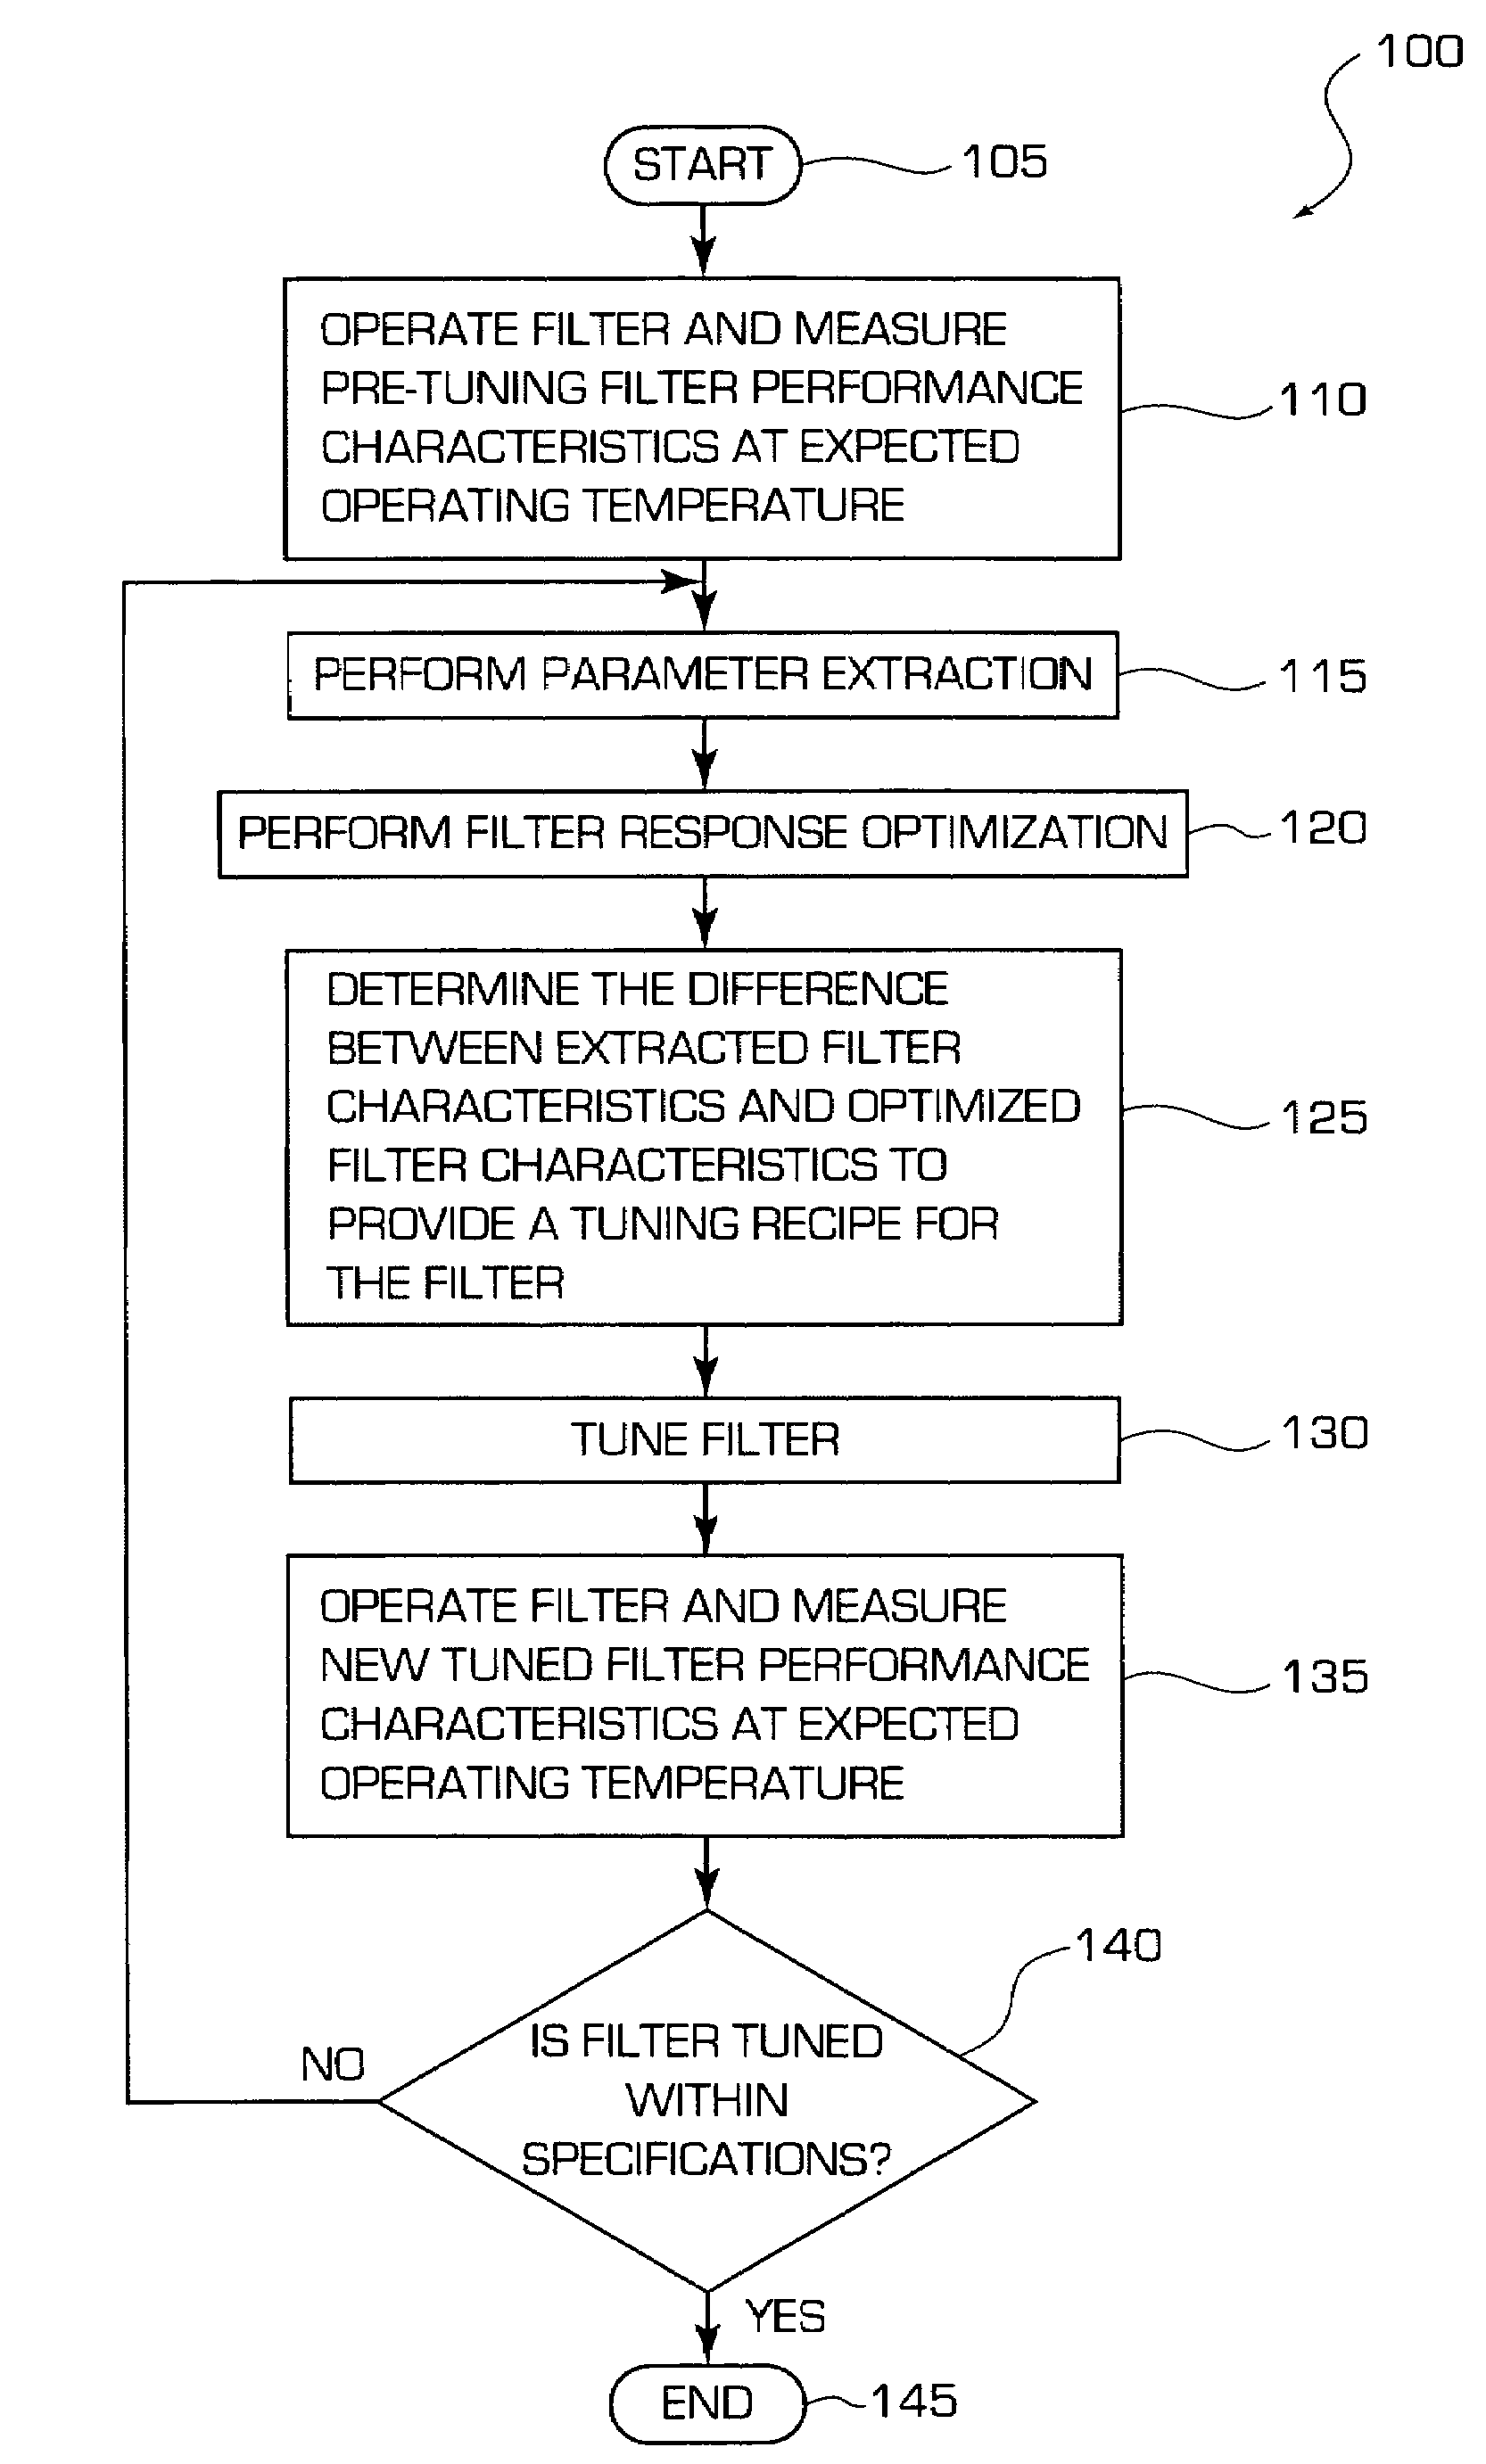 Systems and Methods for Tuning Filters